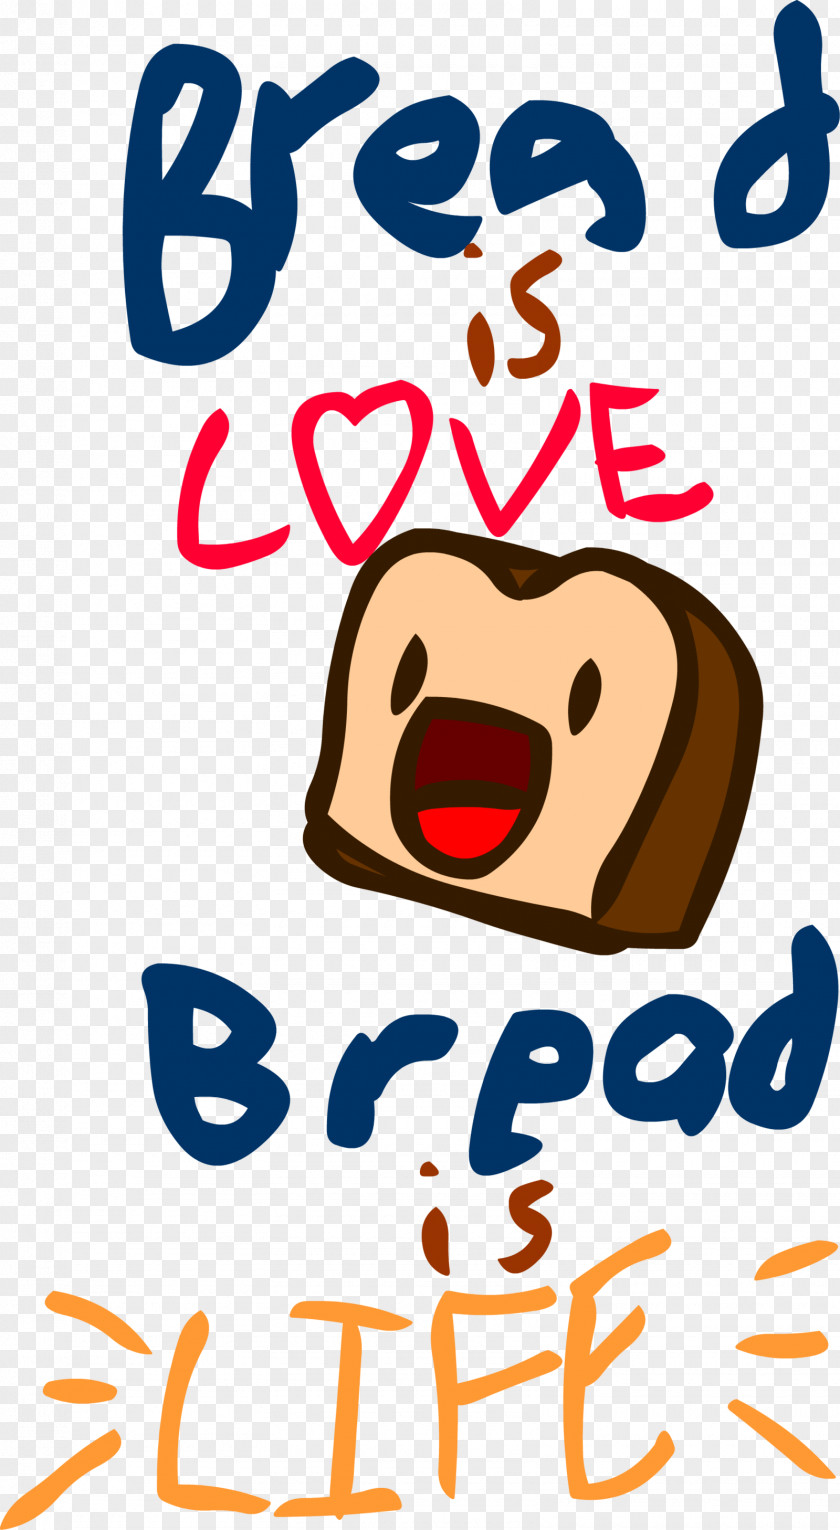 Bread Love Happiness Drawing Clip Art PNG